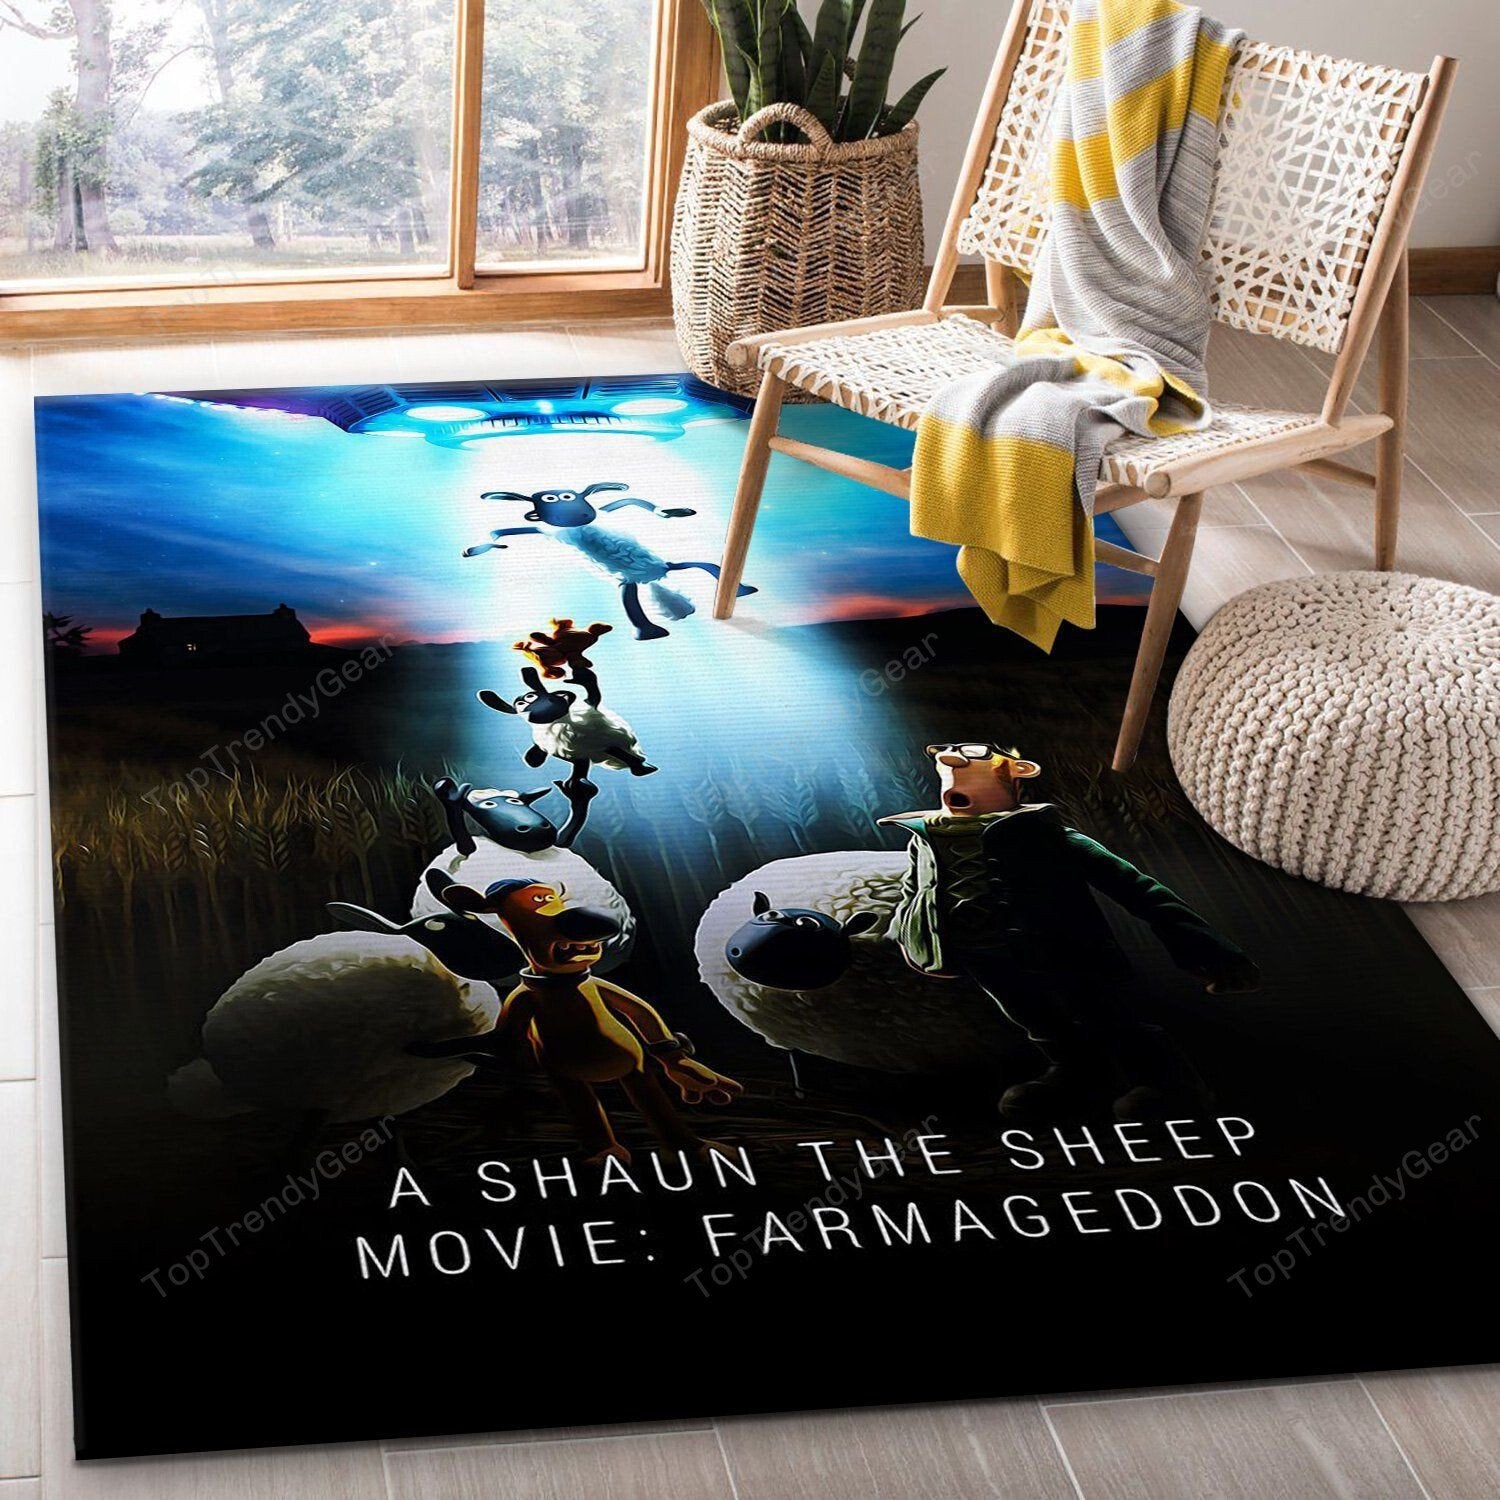 A Shaun The Sheep Movie Area Rug Movie Rug Us Gift Decor Area Rugs For Living Room Rectangle Rug Bedroom Rugs Carpet Flooring Gift RS132680